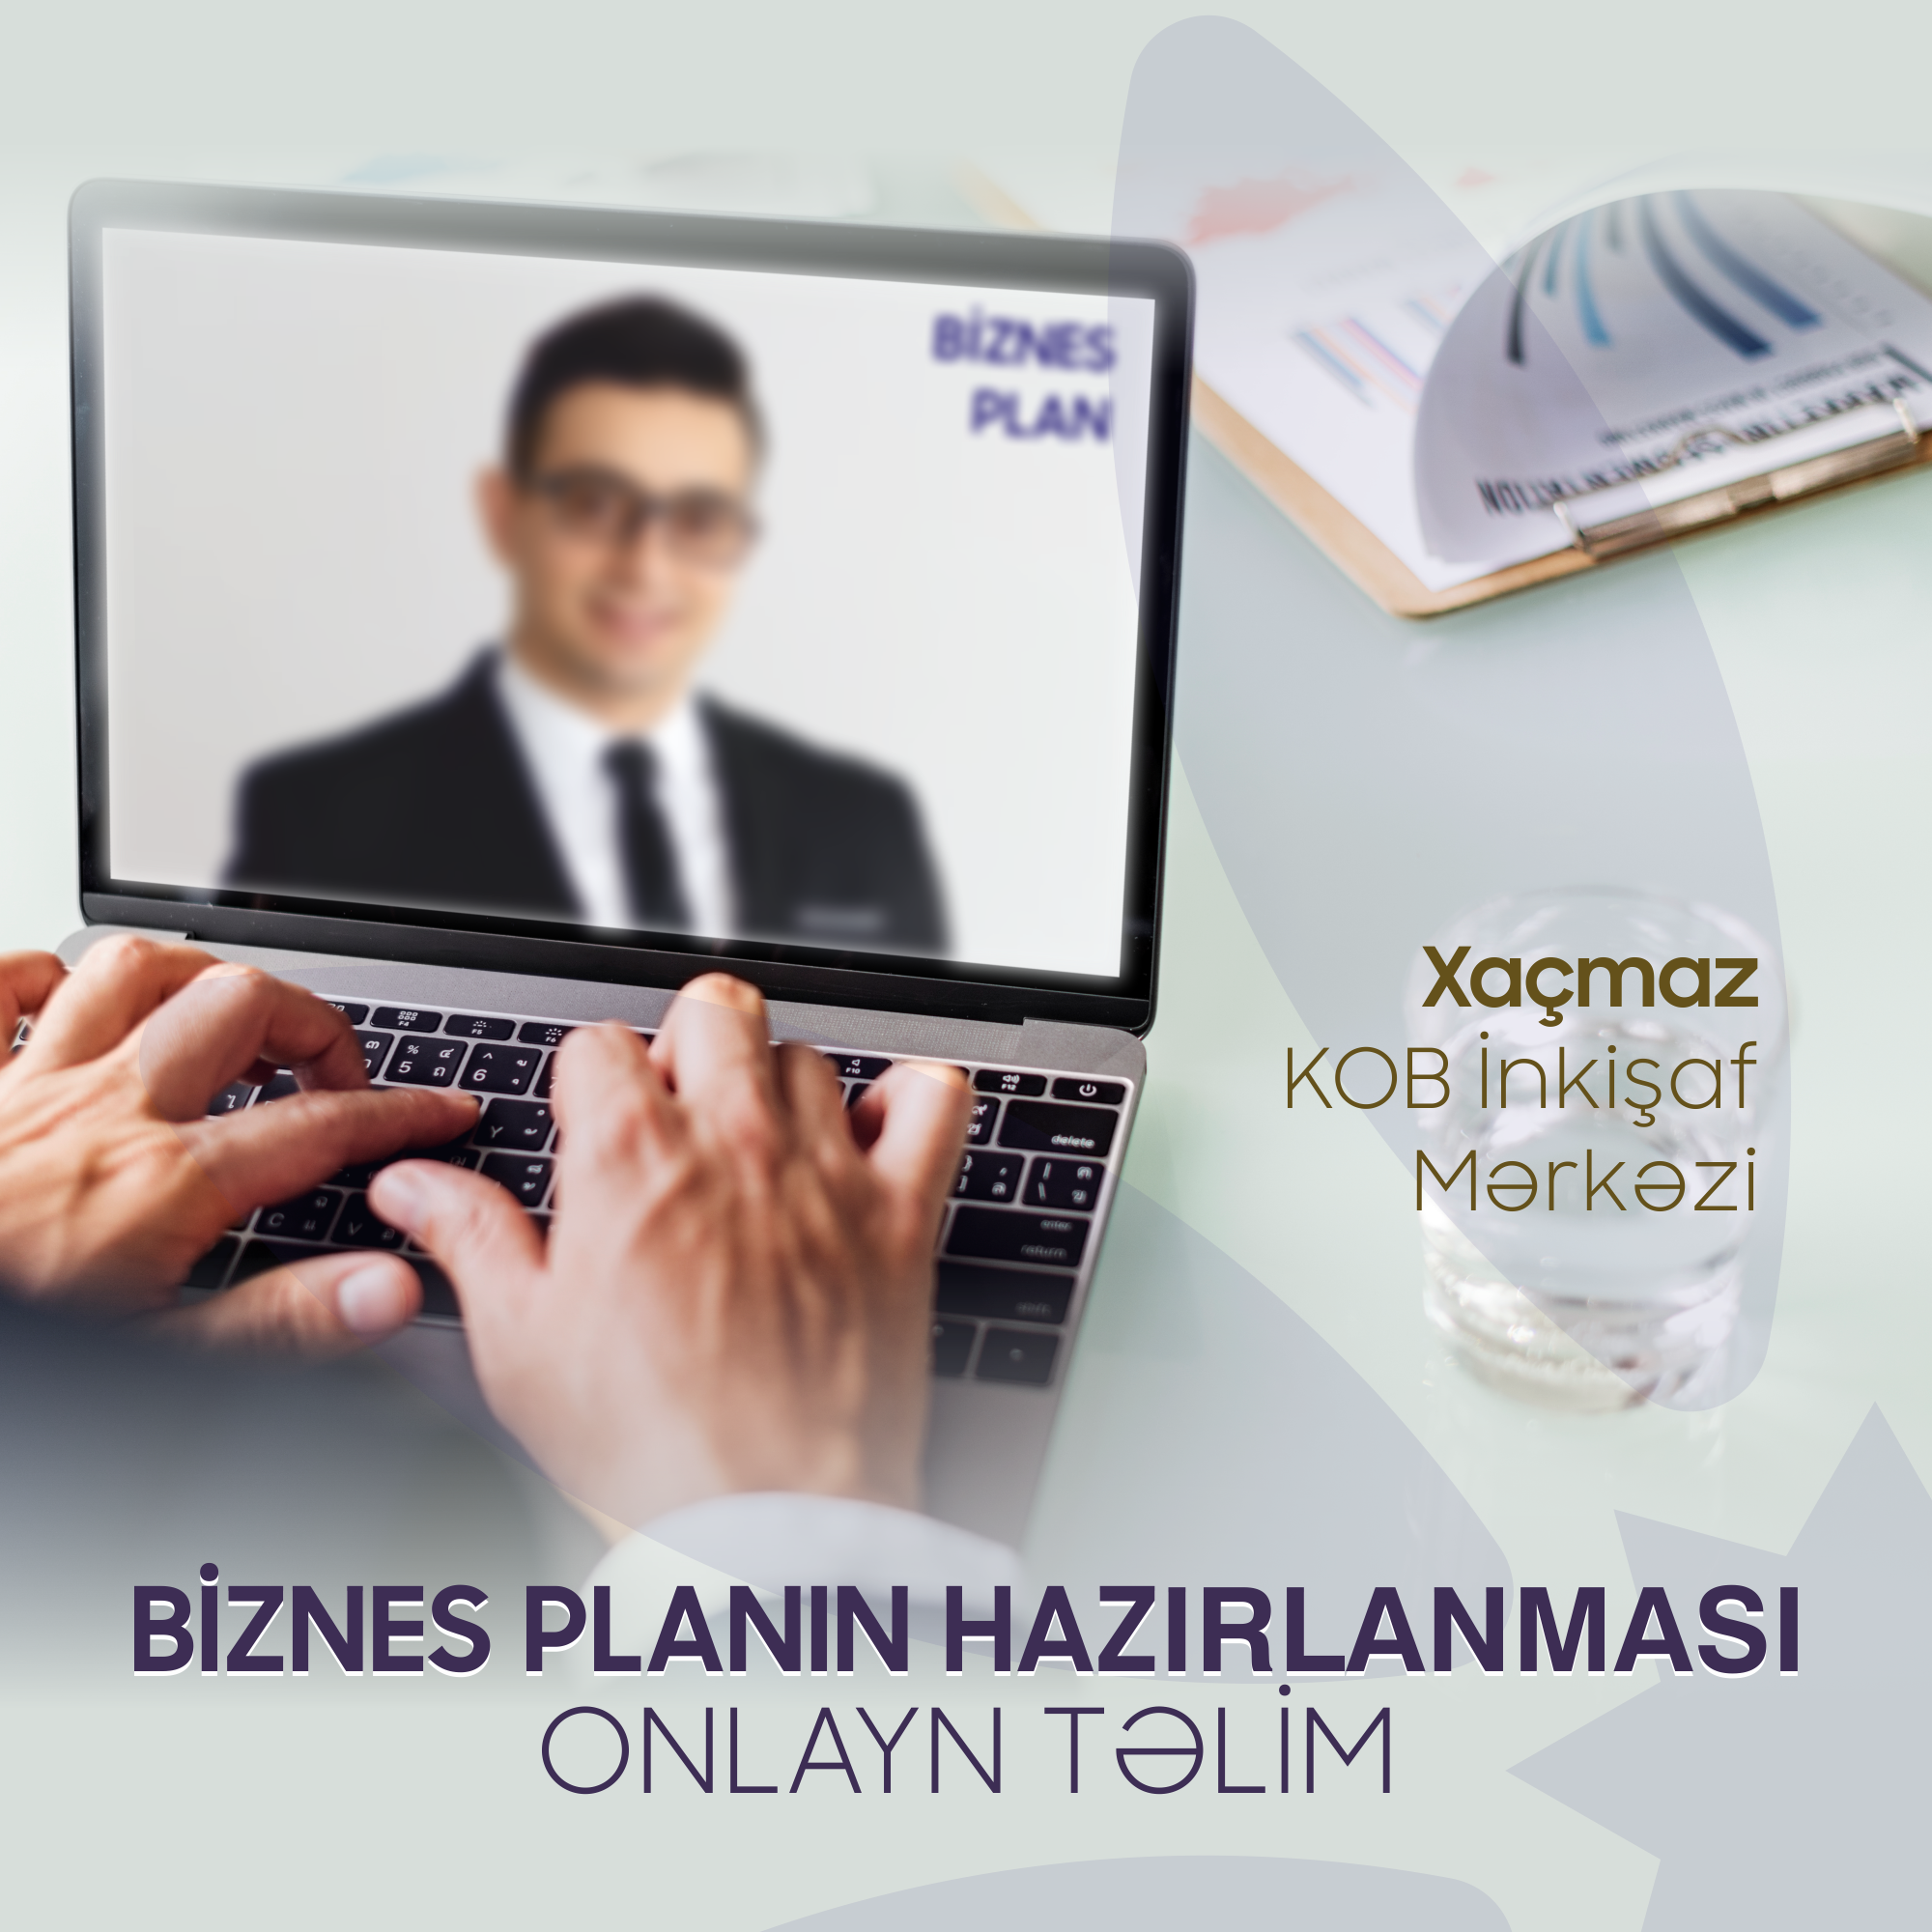 Khachmaz SMB Development Center has launched remote training events on the development of a Business Plan 